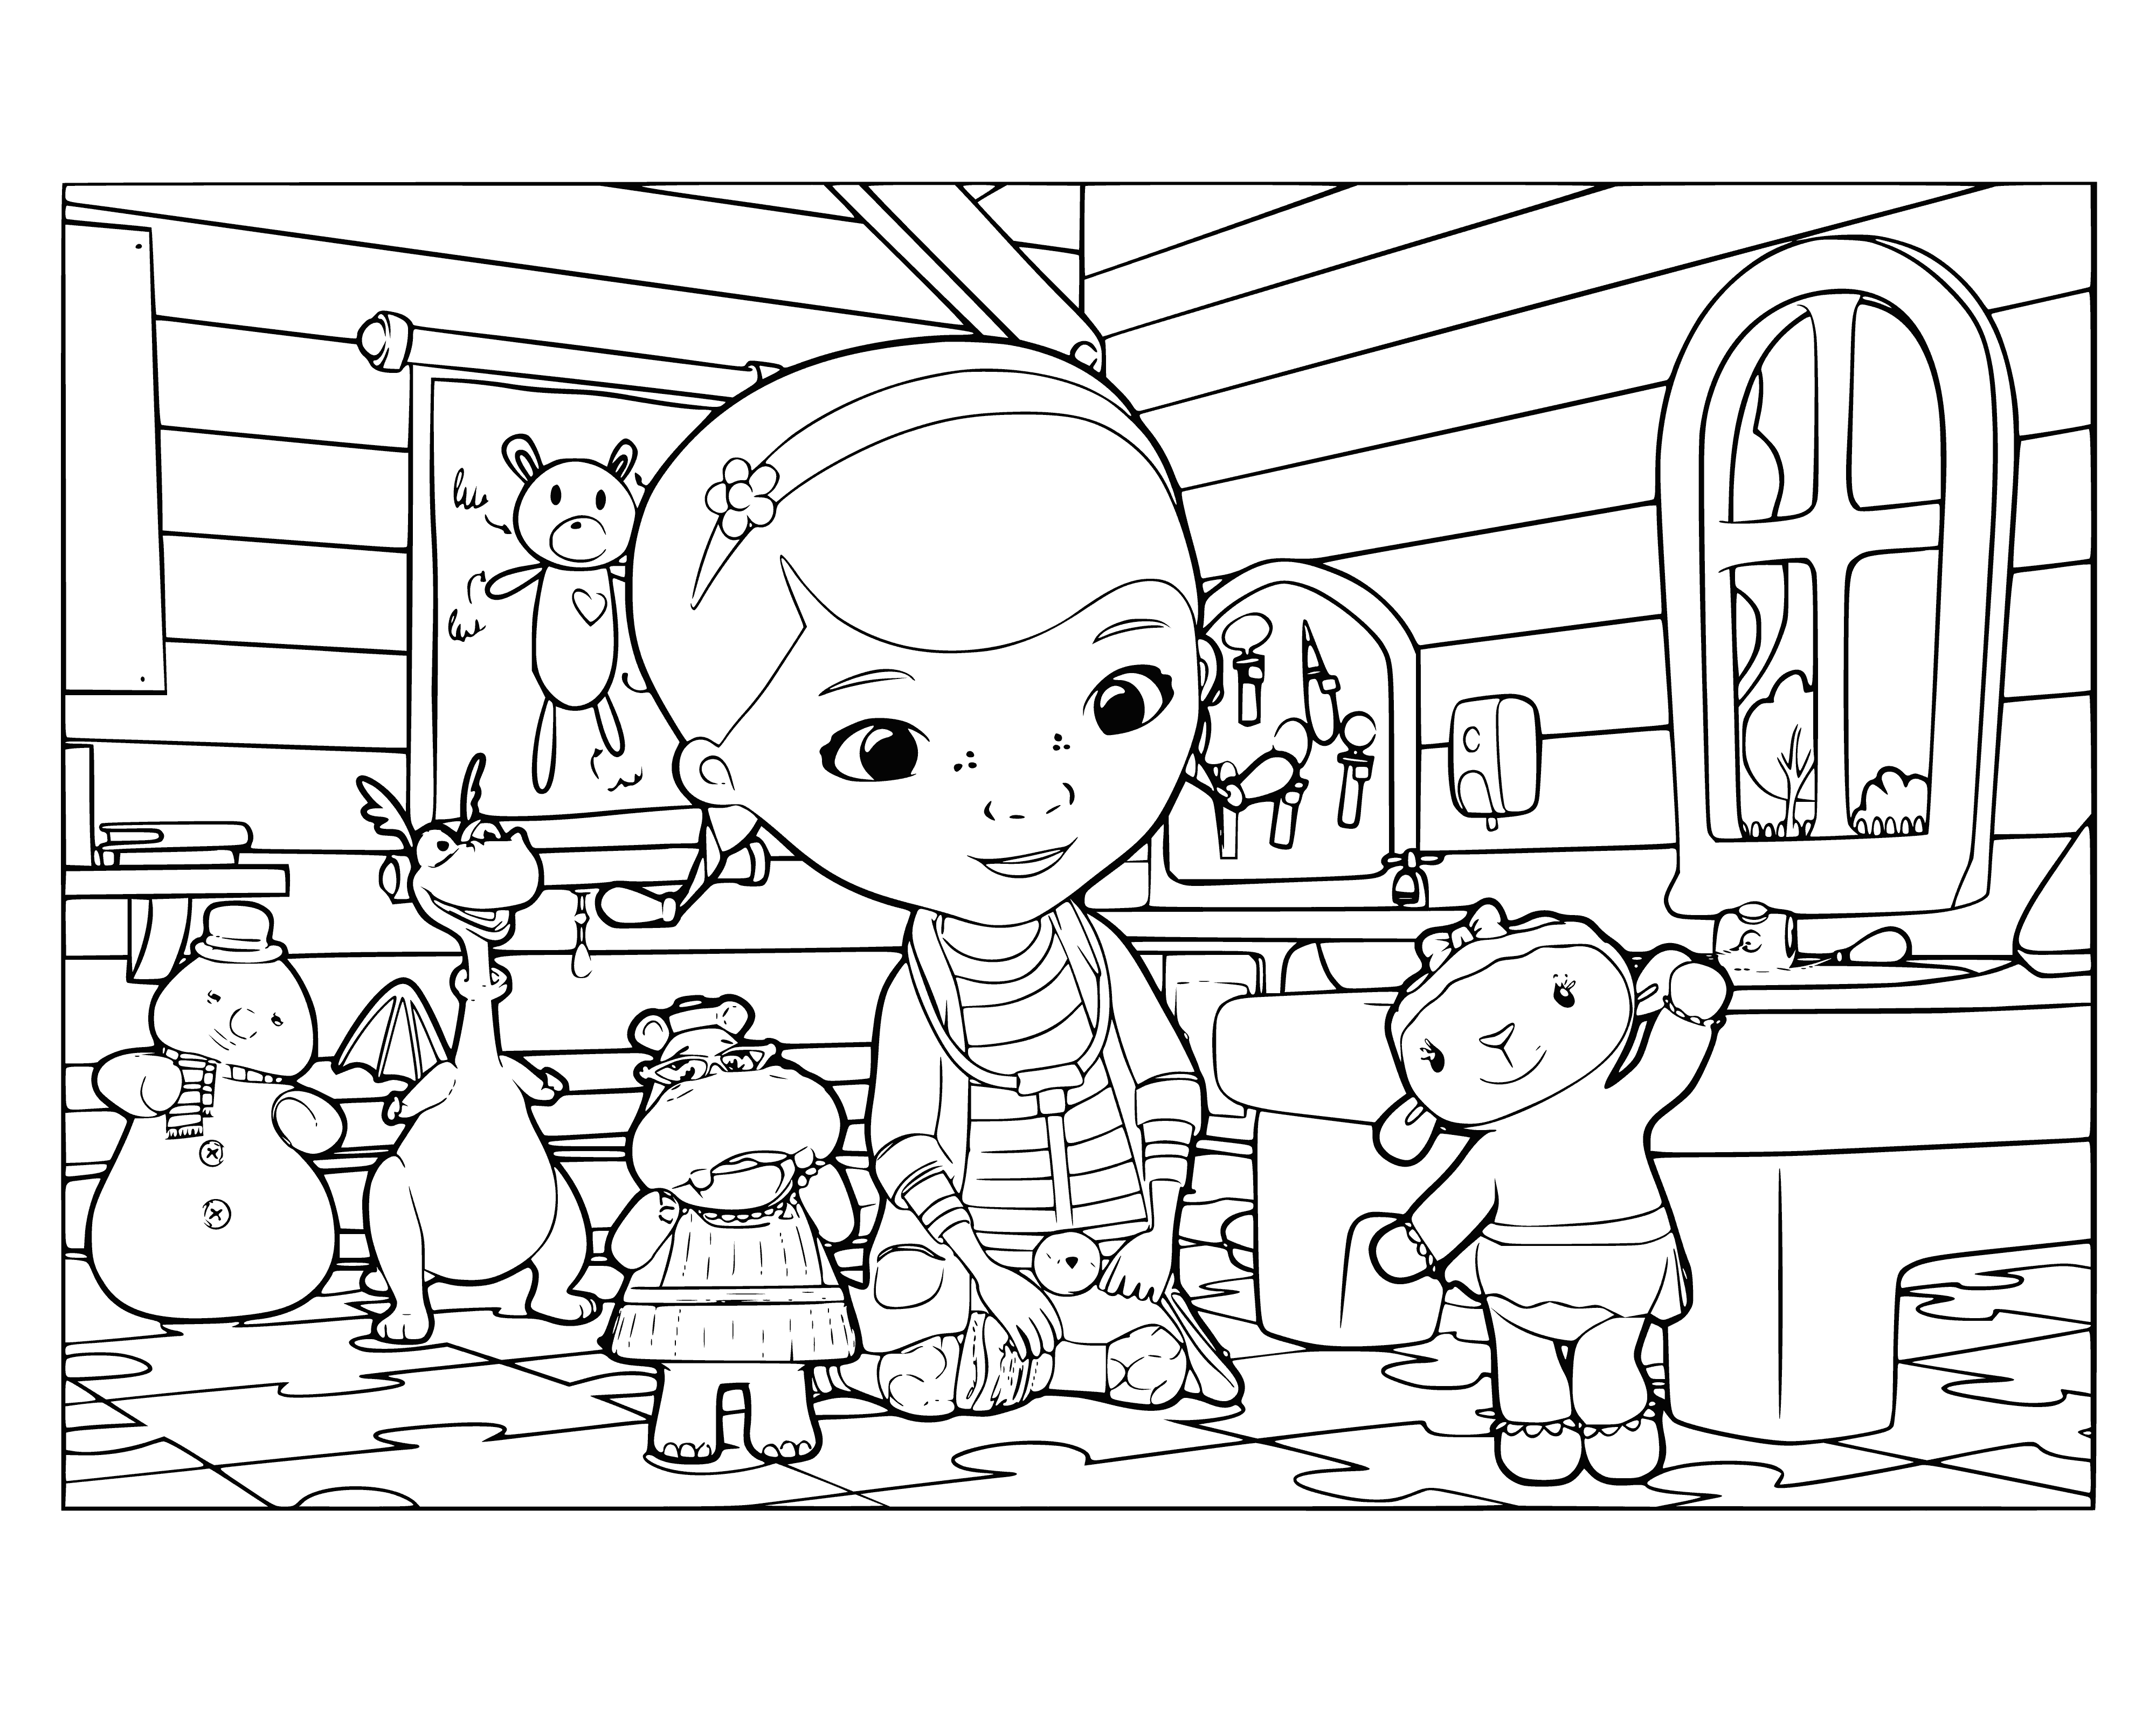 coloring page: Doc McStuffins is smiling at a teddy bear with a bandaged arm in her backyard, which has a trampoline, swing set and a white picket fence.